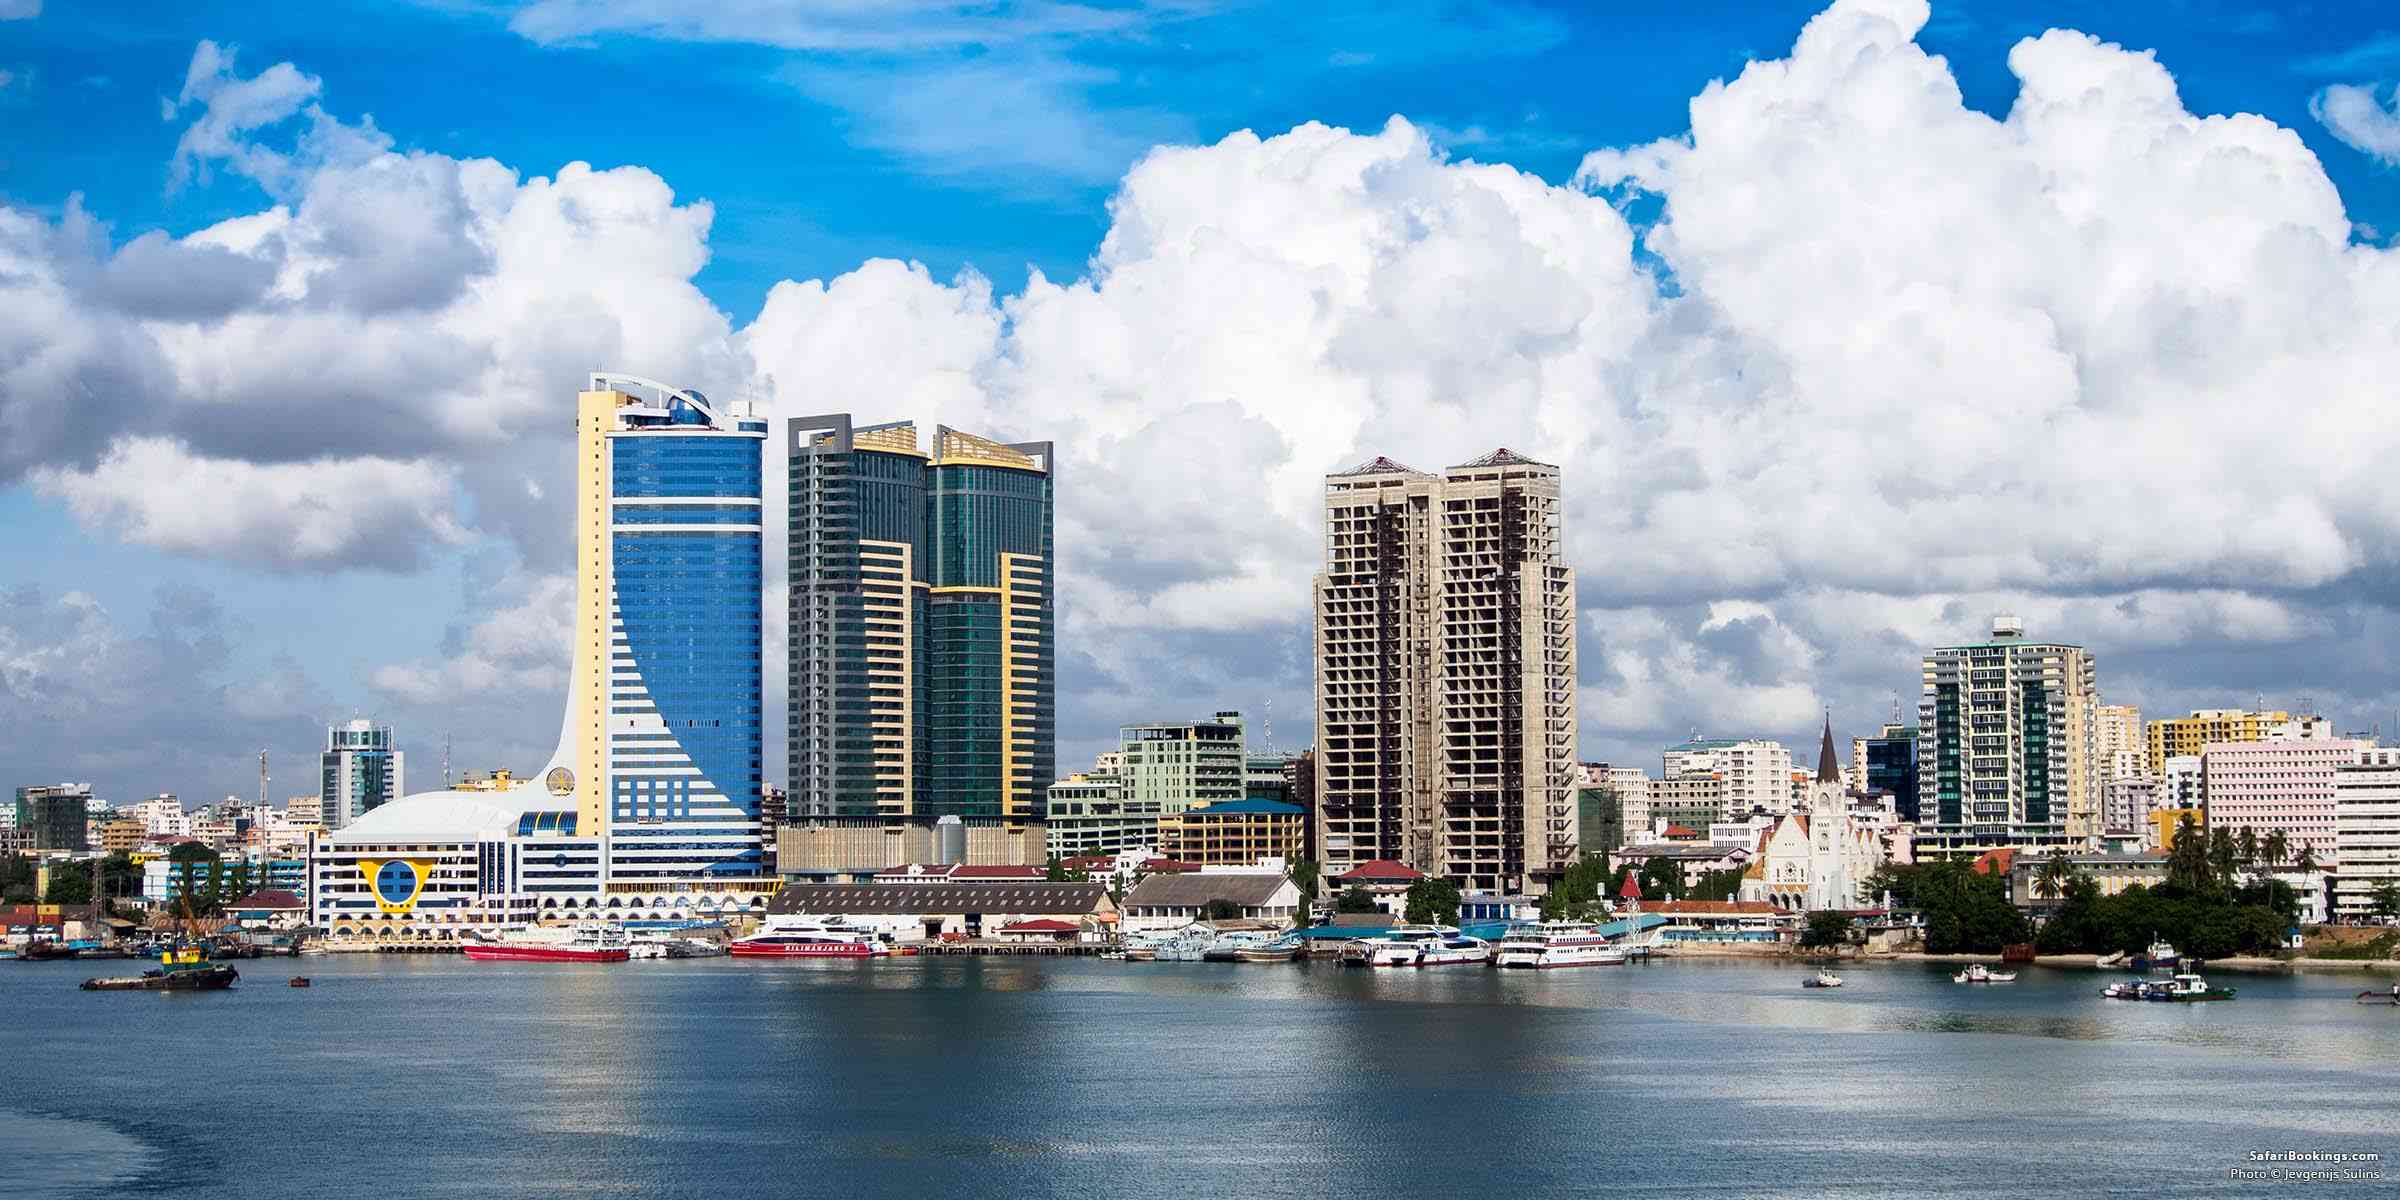 Tanzania is fast becoming one of the best investment destinations in the world